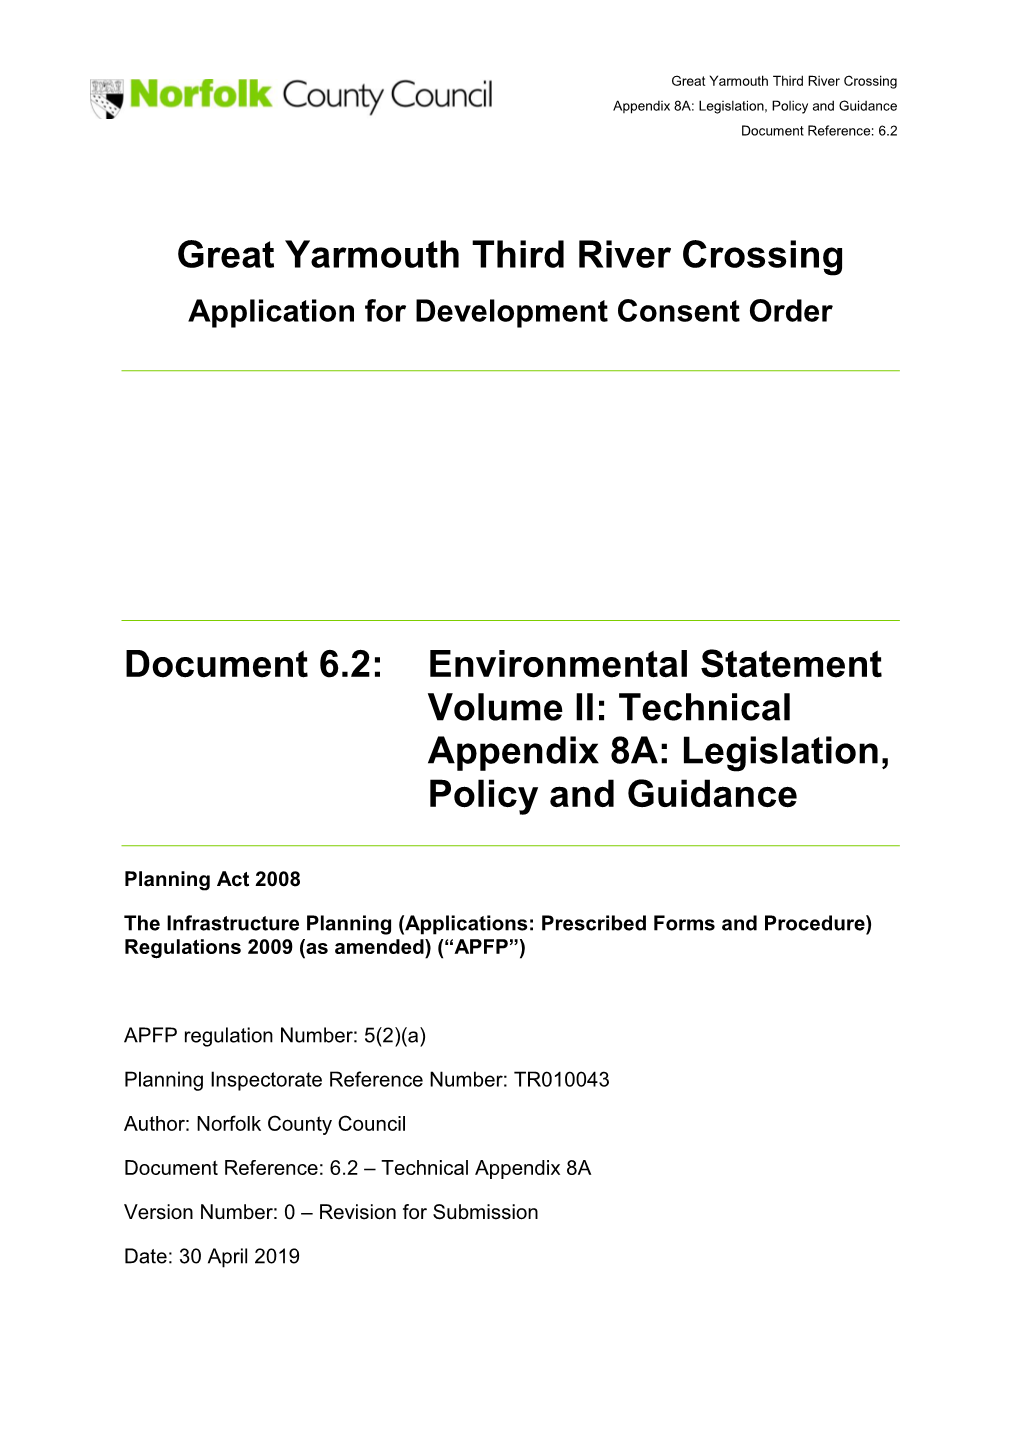 Great Yarmouth Third River Crossing Document 6.2: Environmental Statement Volume II